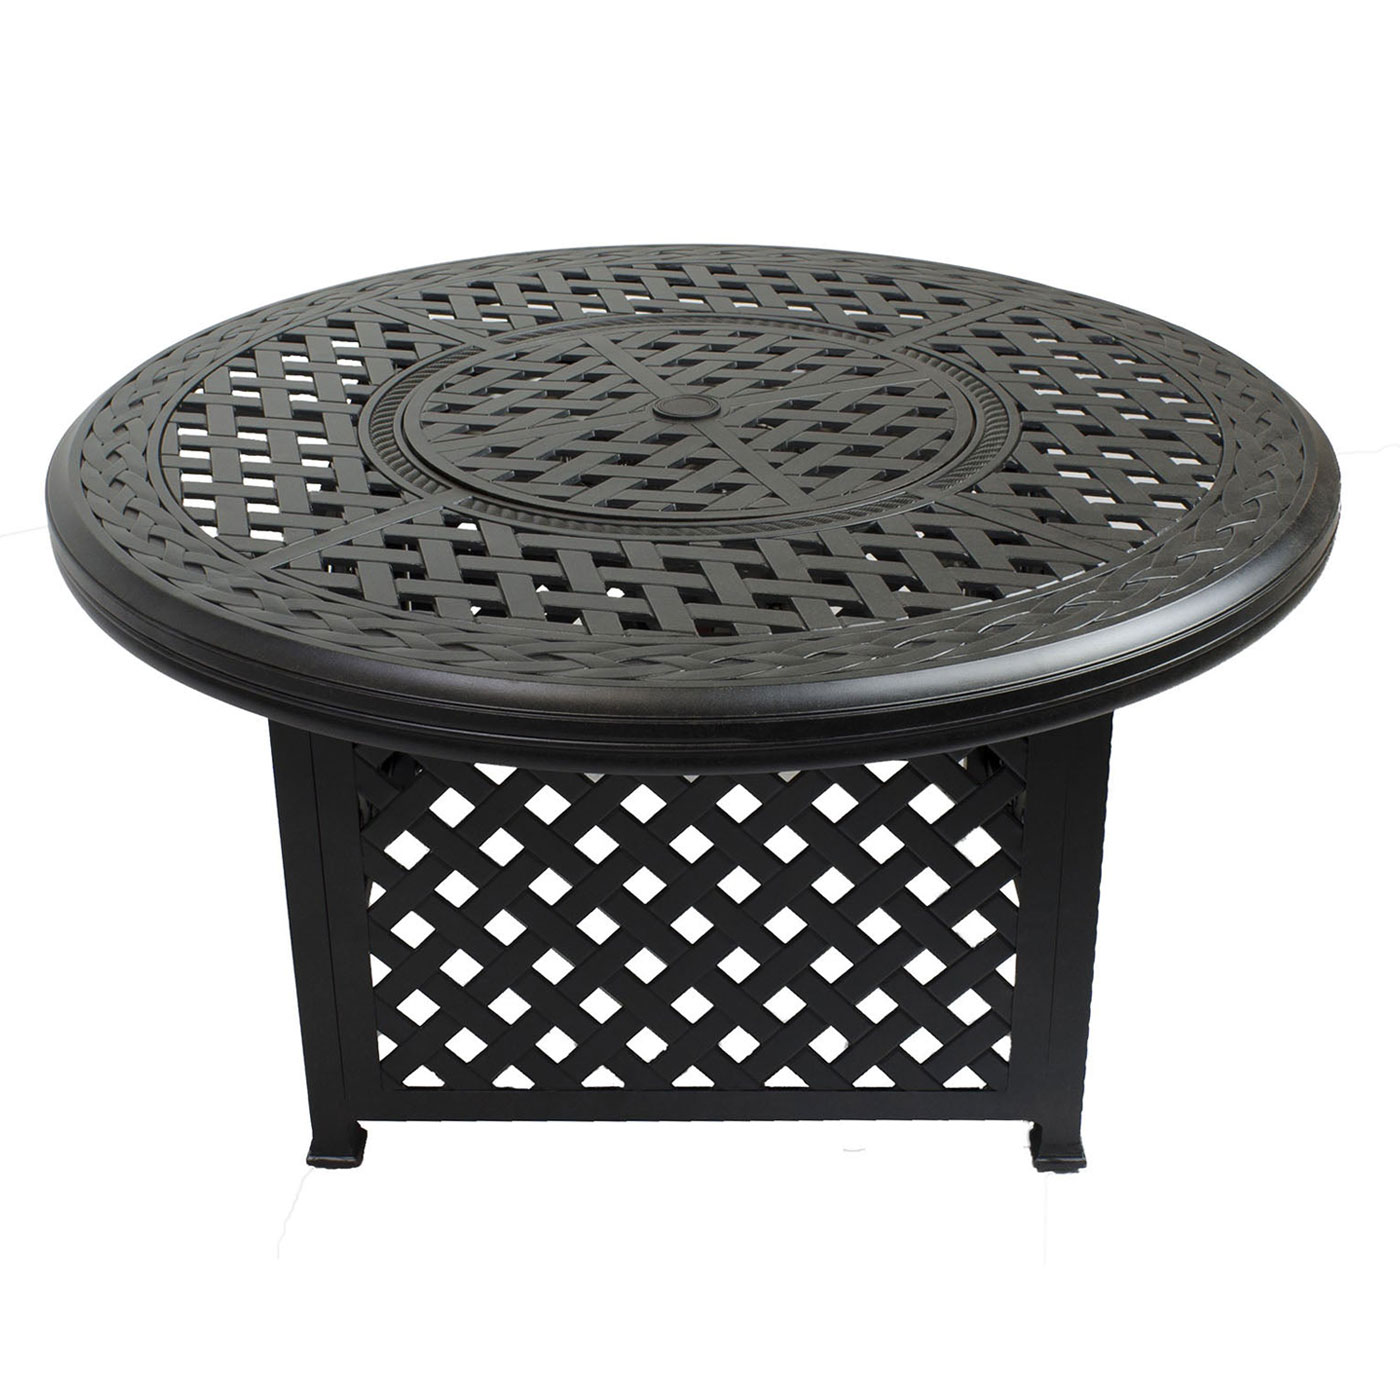 48" Round Chat Firepit Table Weave (Burner or Ice Bucket Optional)